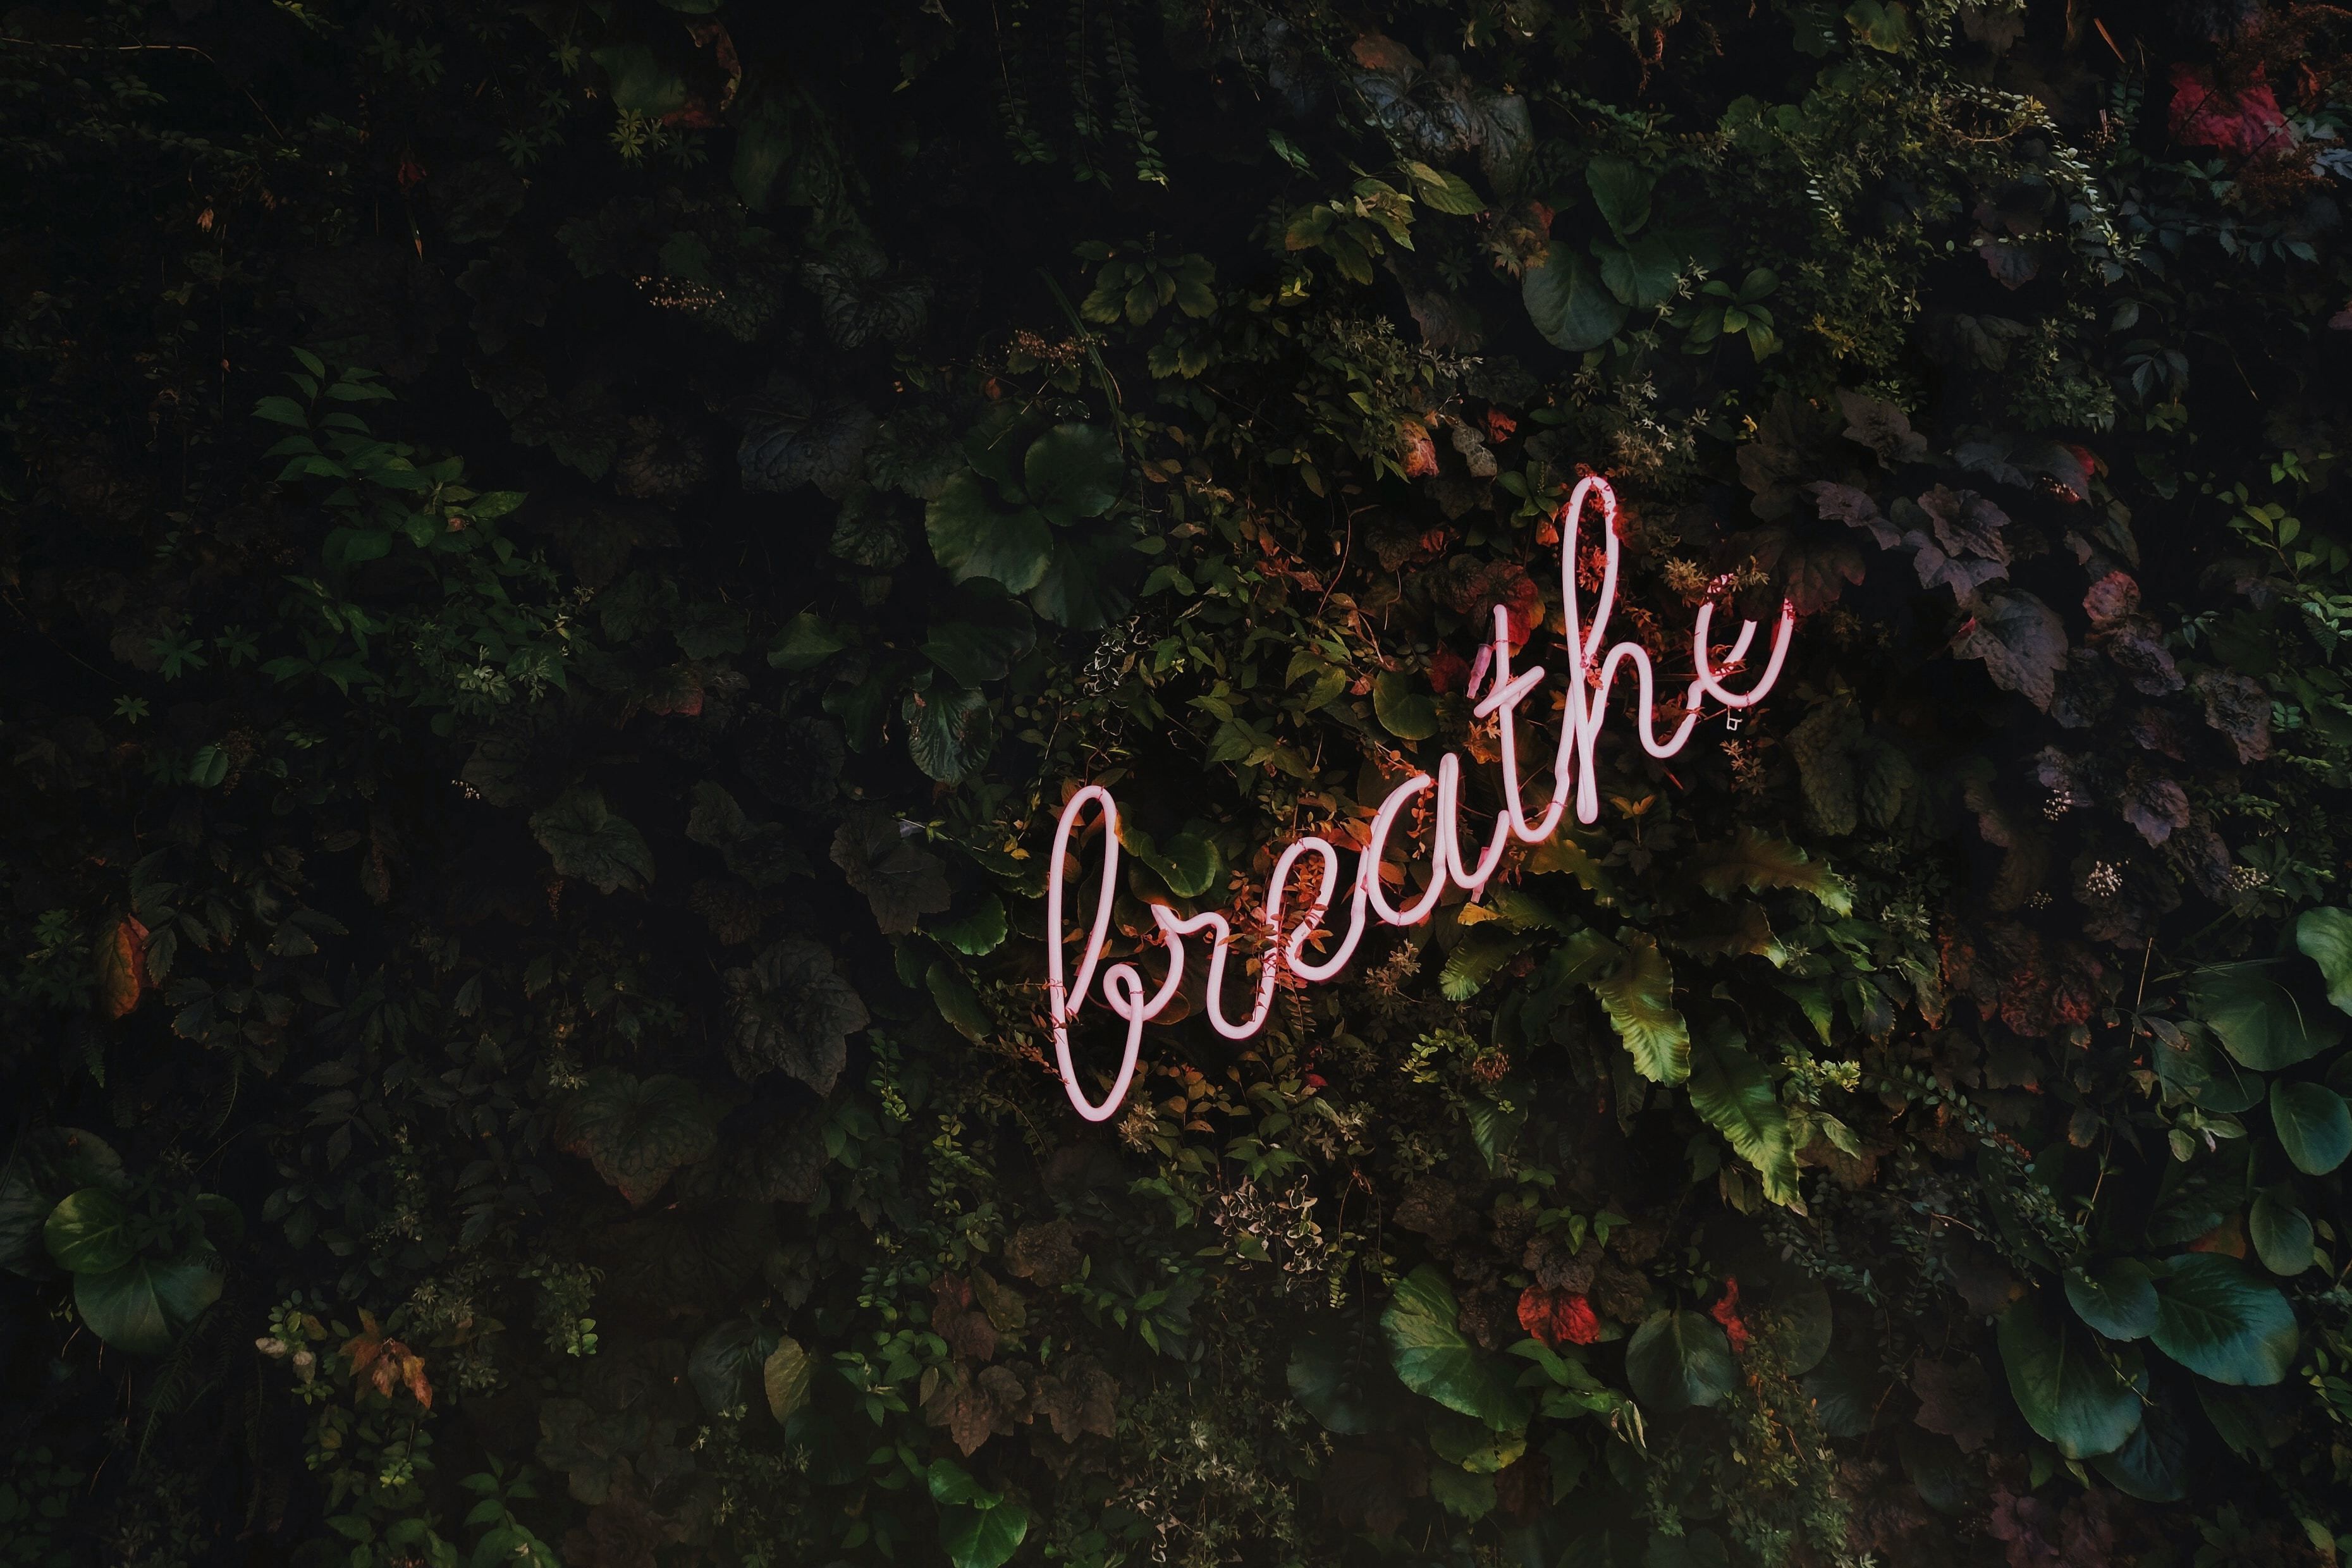 Neon sign stating "breathe" surrounded by green plants.